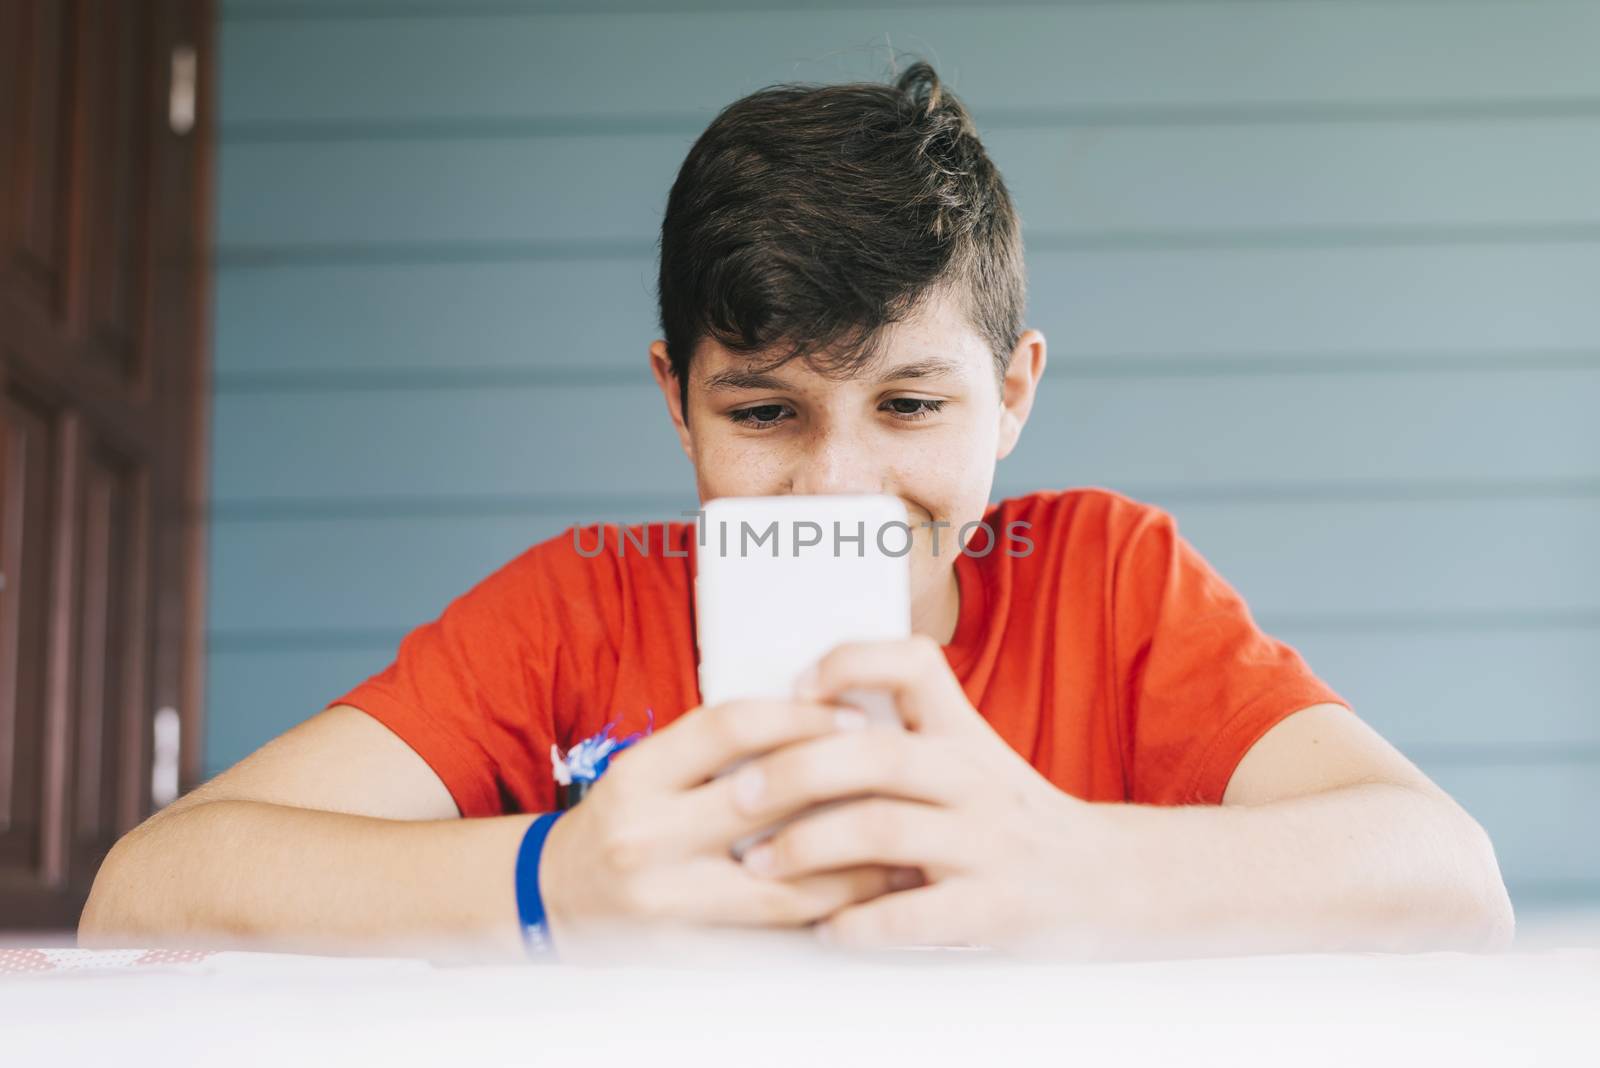 Handsome Caucasian 13-year old boy wearing red t-shirt sitting outdoors using electronic gadget. Schoolboy holding mobile phone, messaging friends